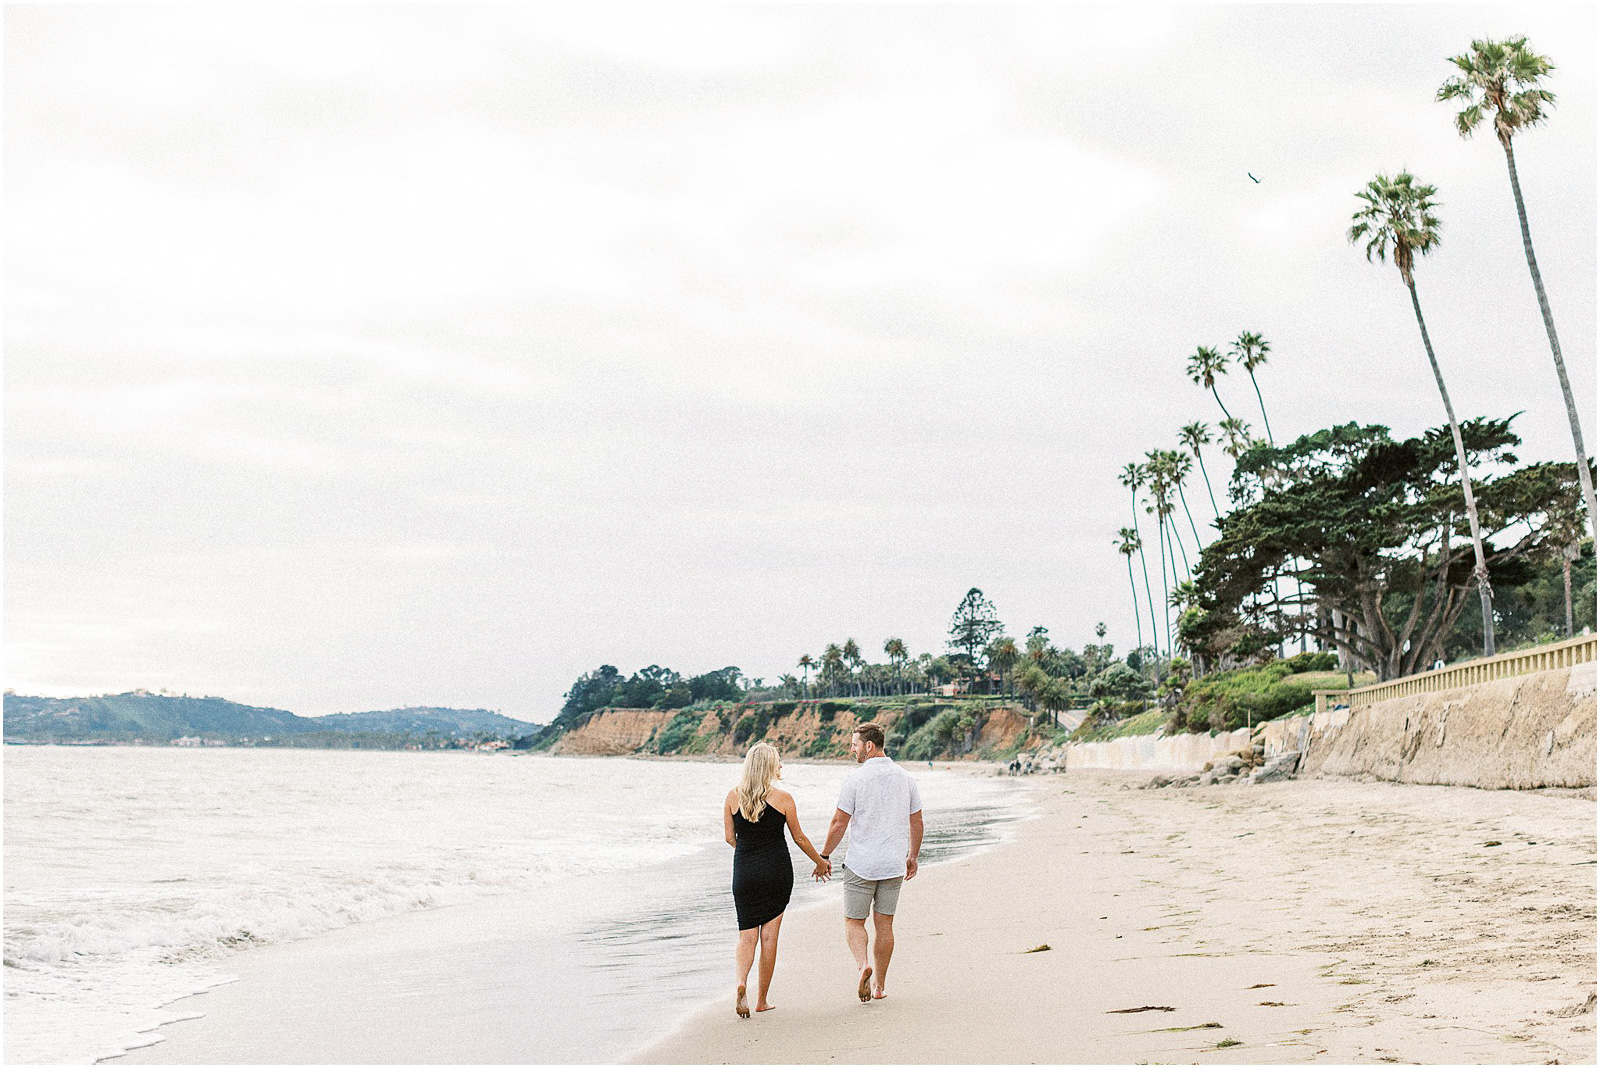 Husband and wife walking down the beach in Montecito, Ca.